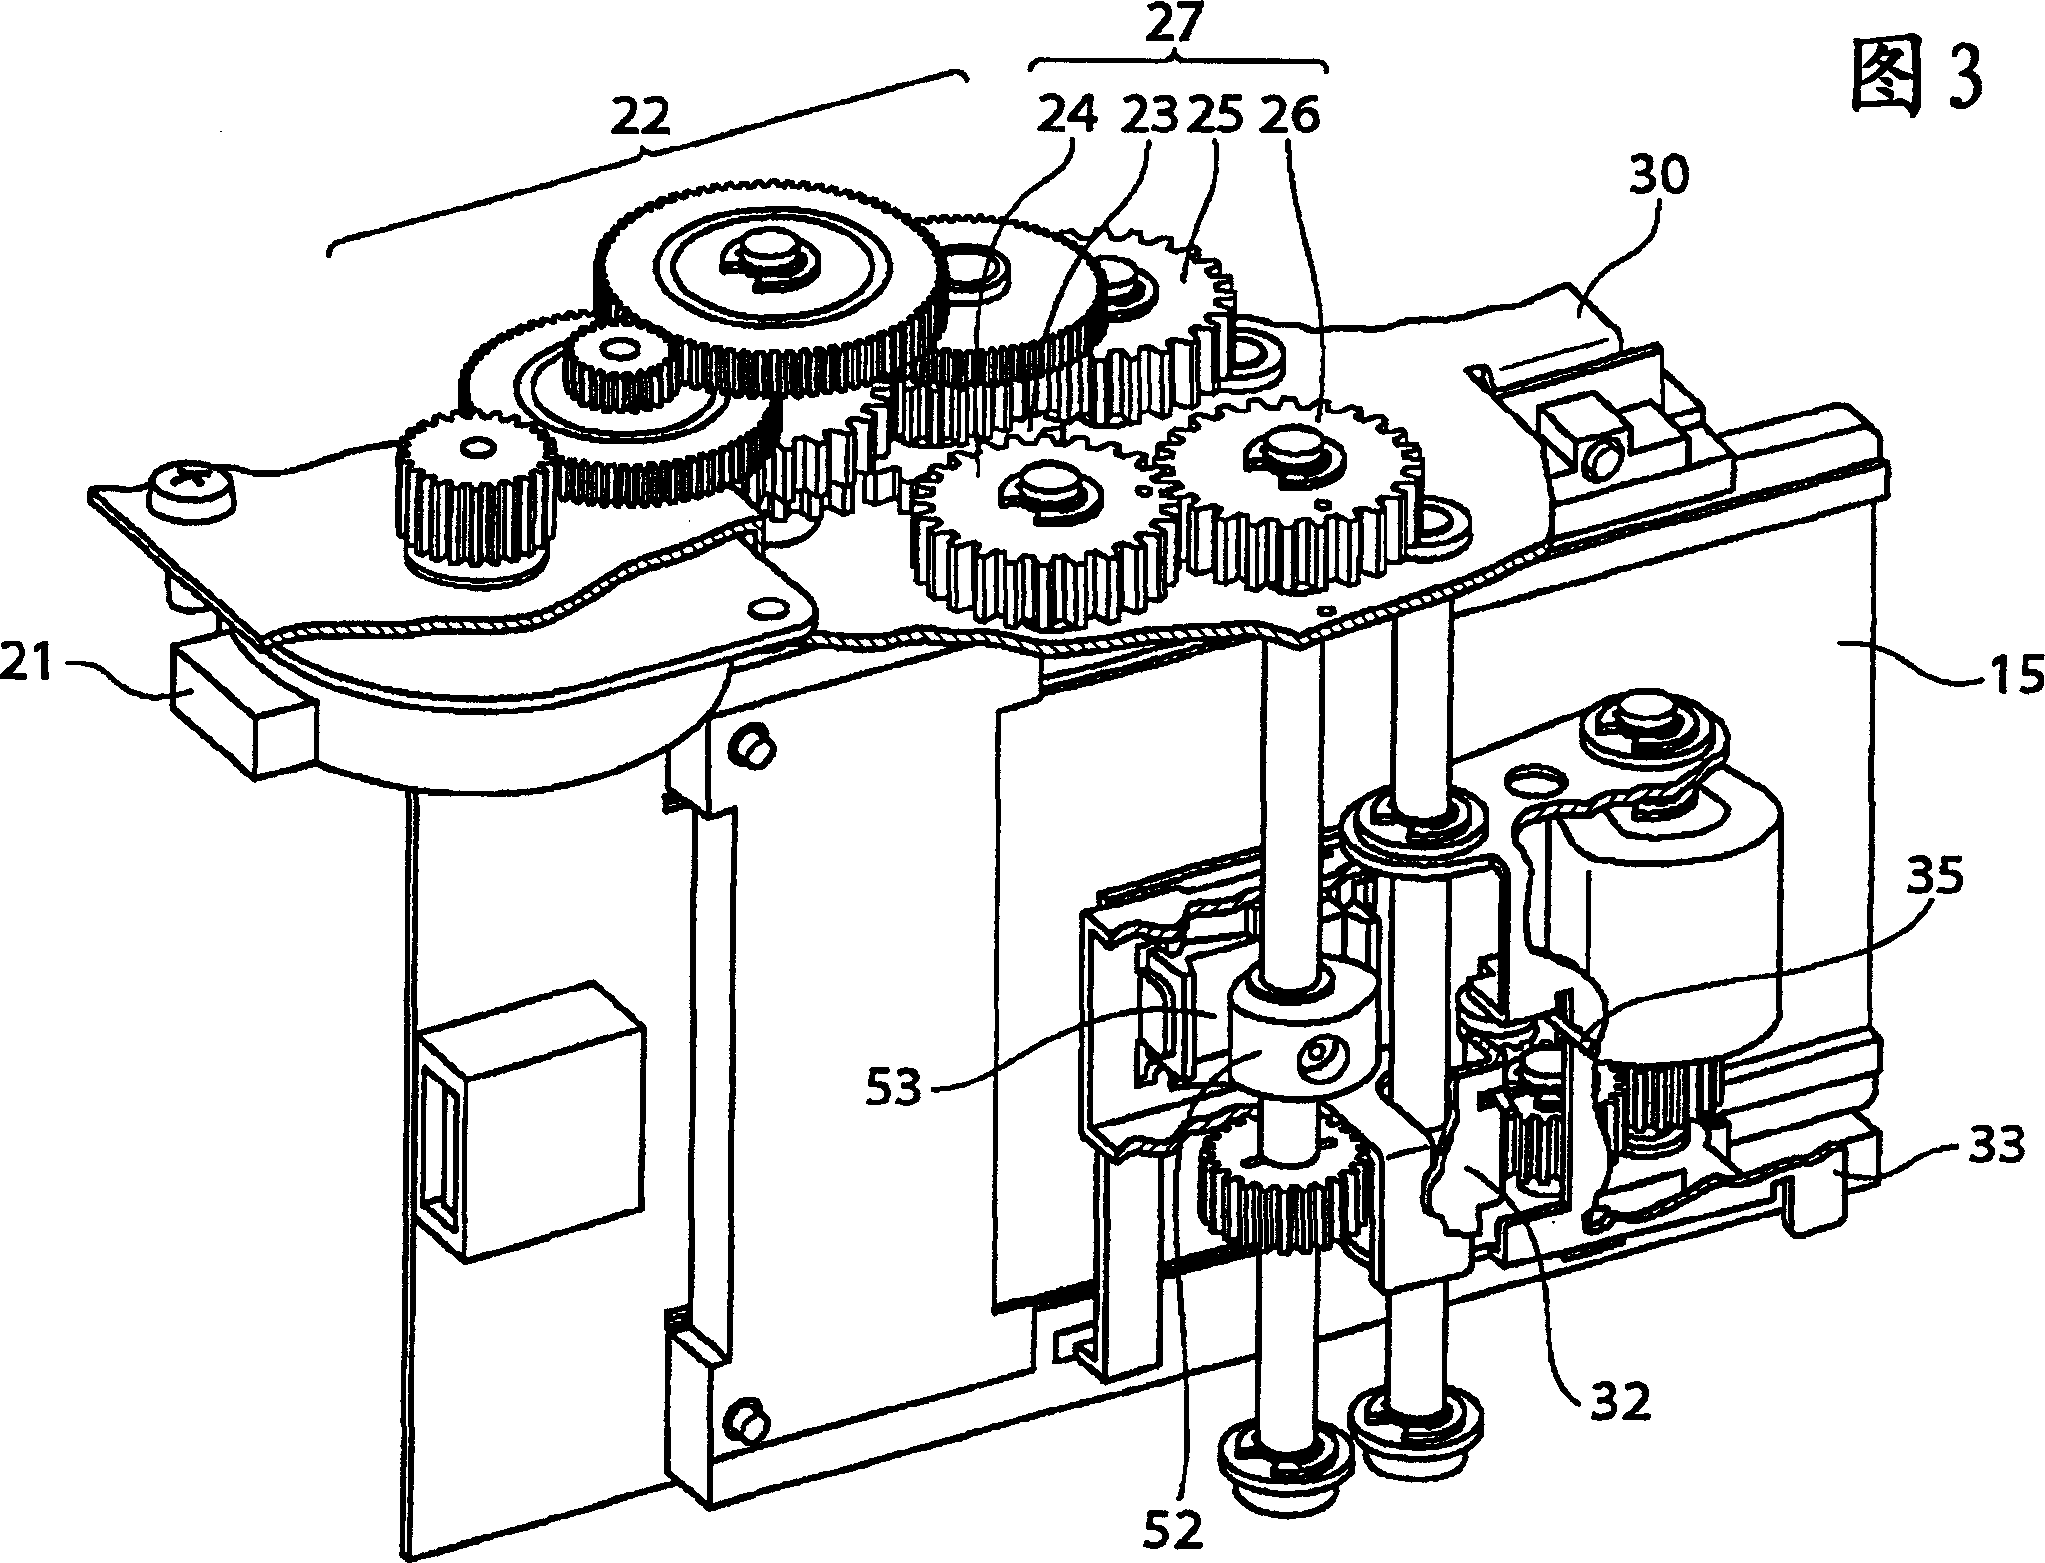 Storage medium assembling and disassembling mechanism and information processing apparatus